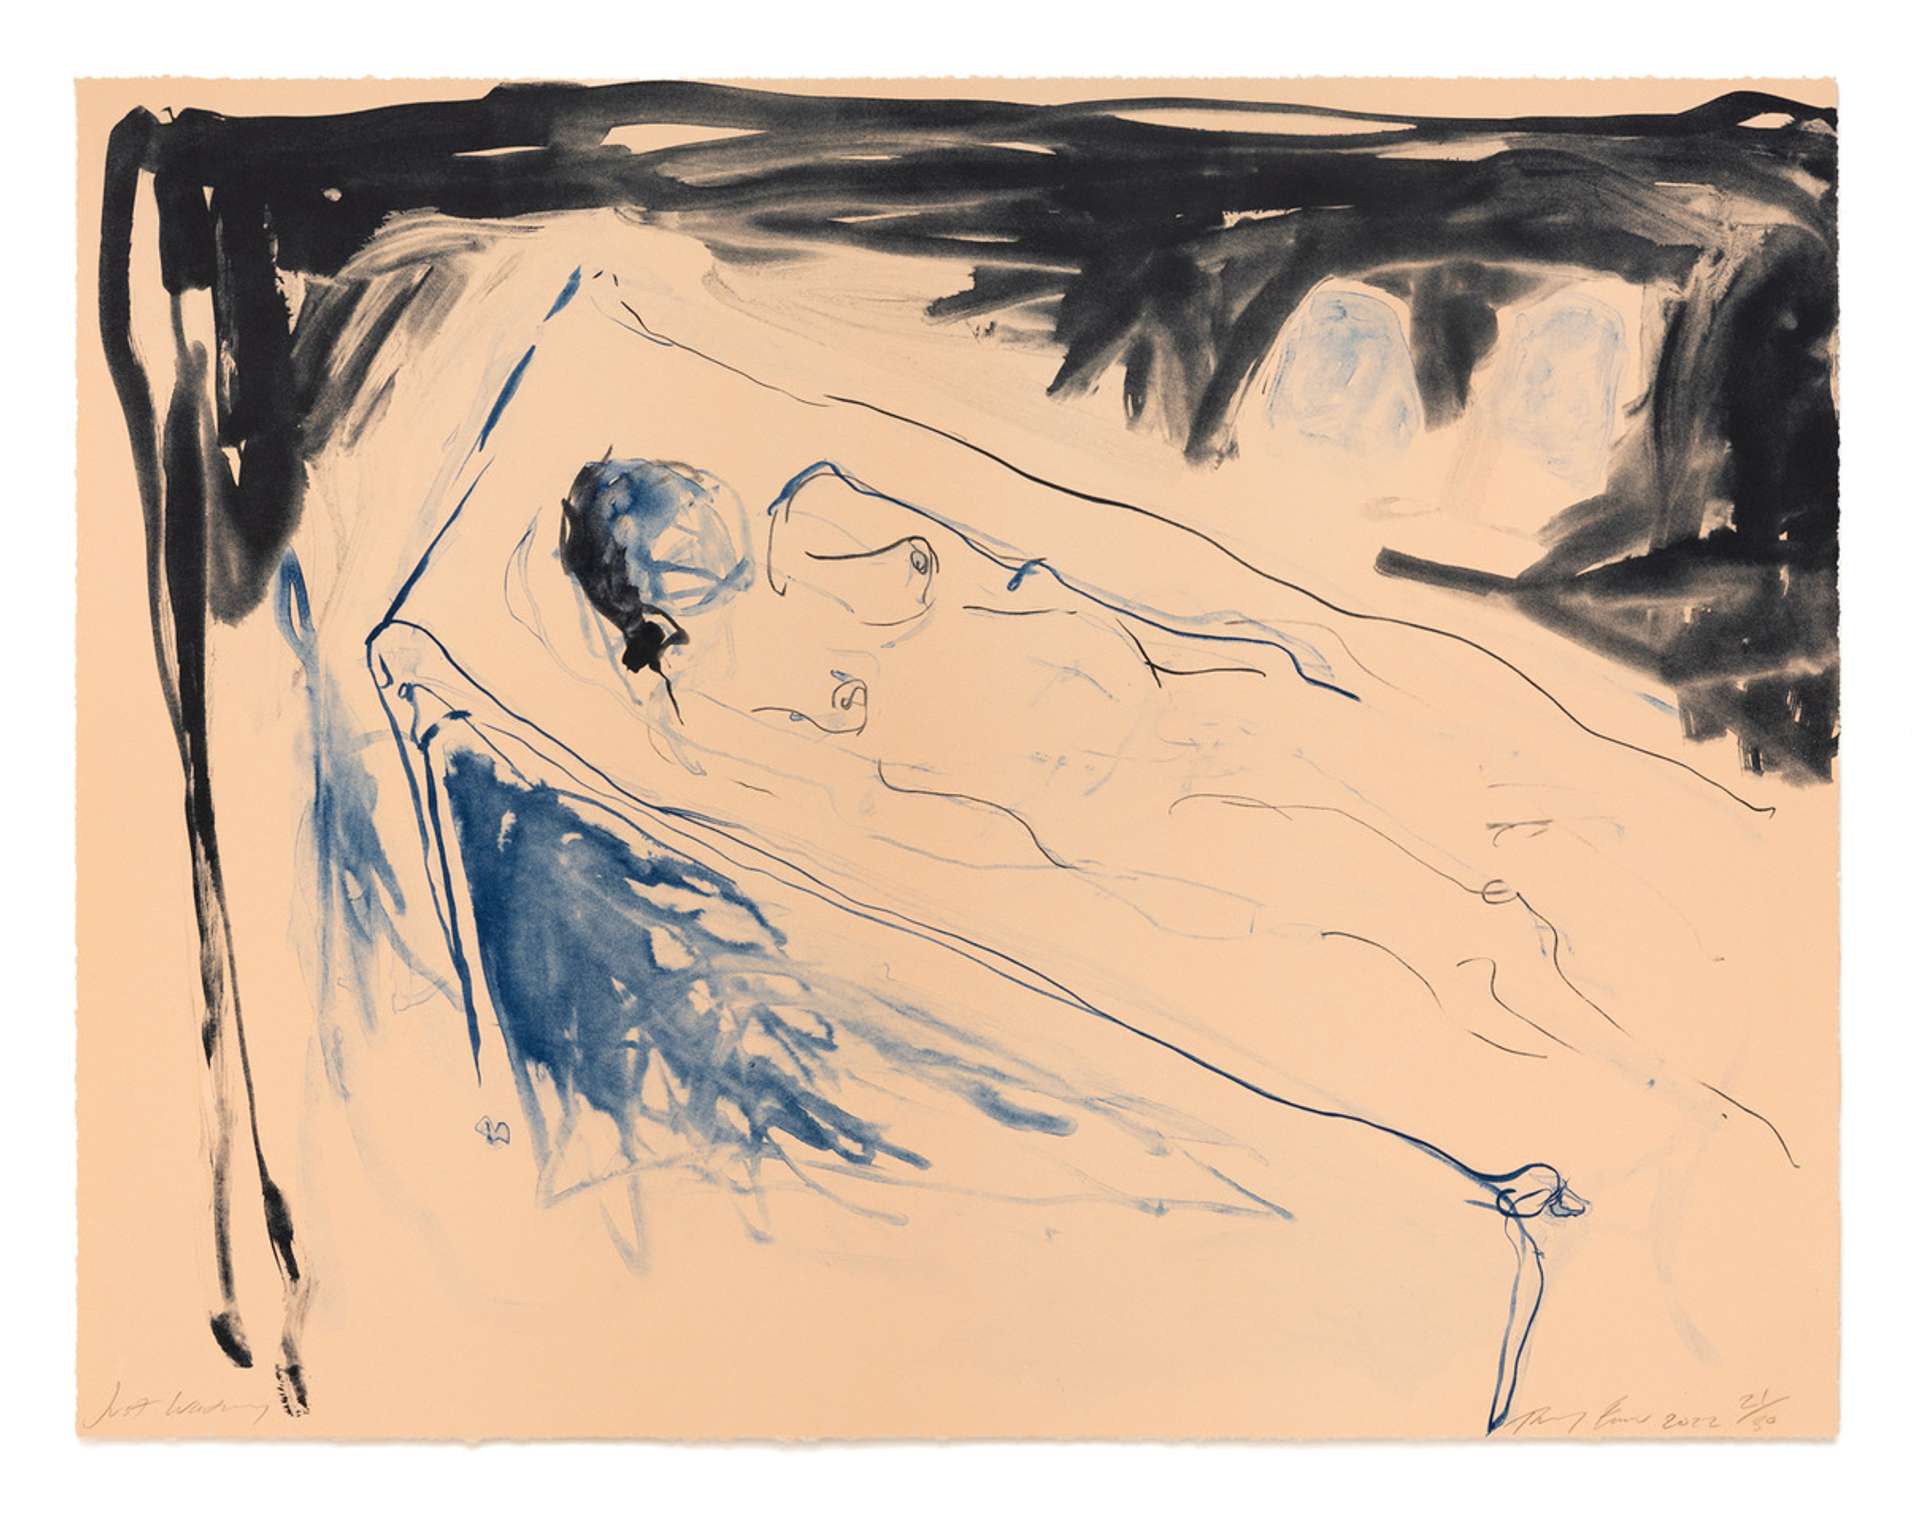 Just Waiting: Tracey Emin’s New Print Run With Counter Editions